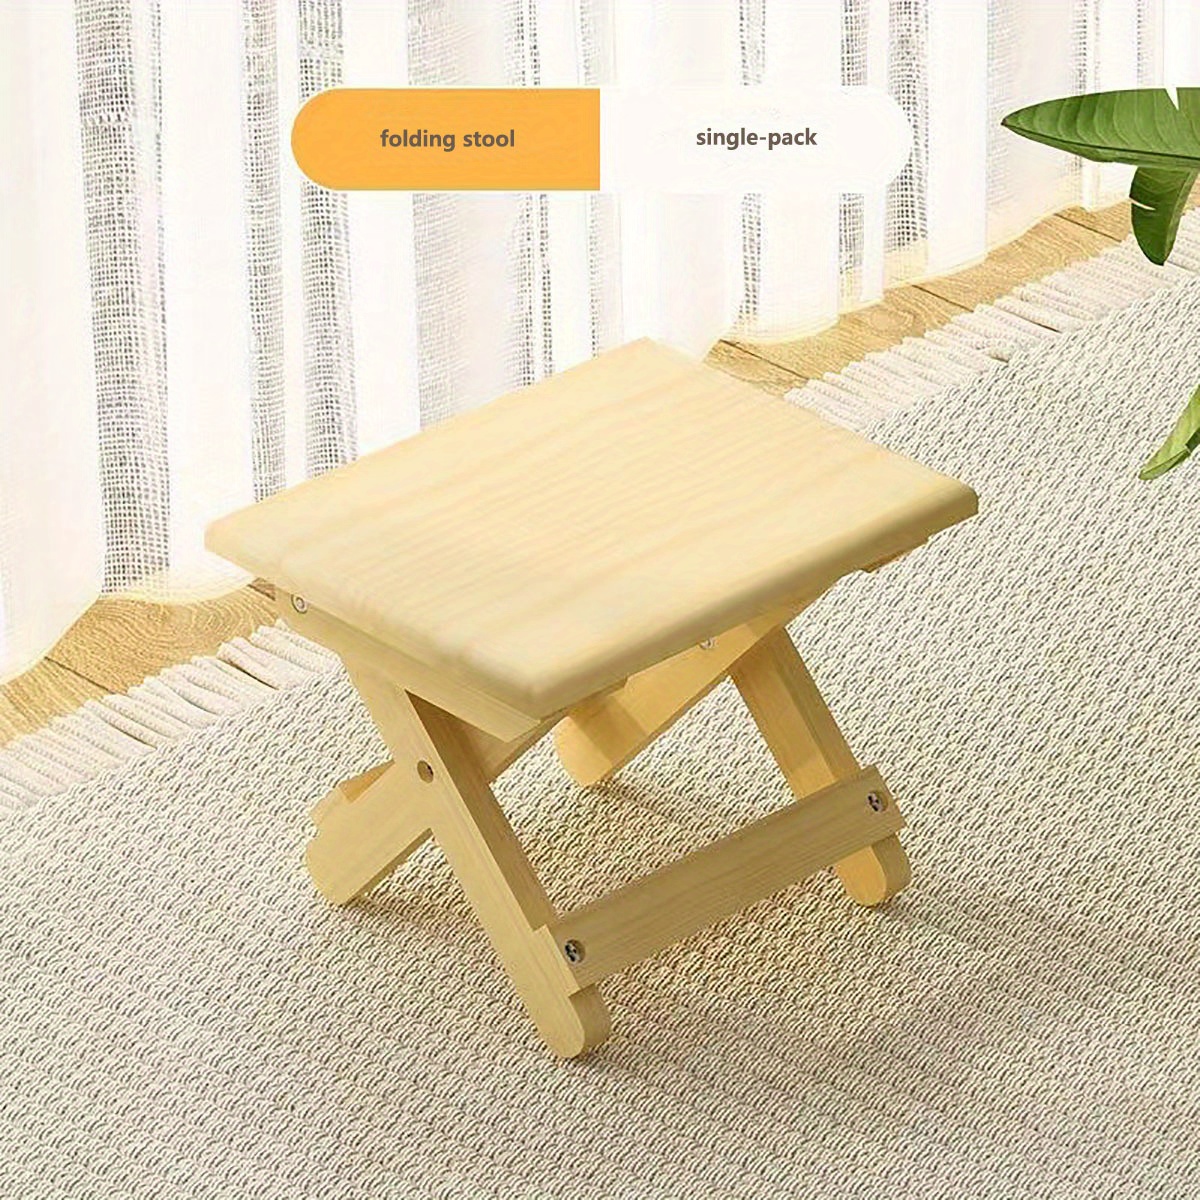 Wooden Folding Chair Small Seat Children Camping Seat Fishing Stool – Wood,  Iron & Copper Craft